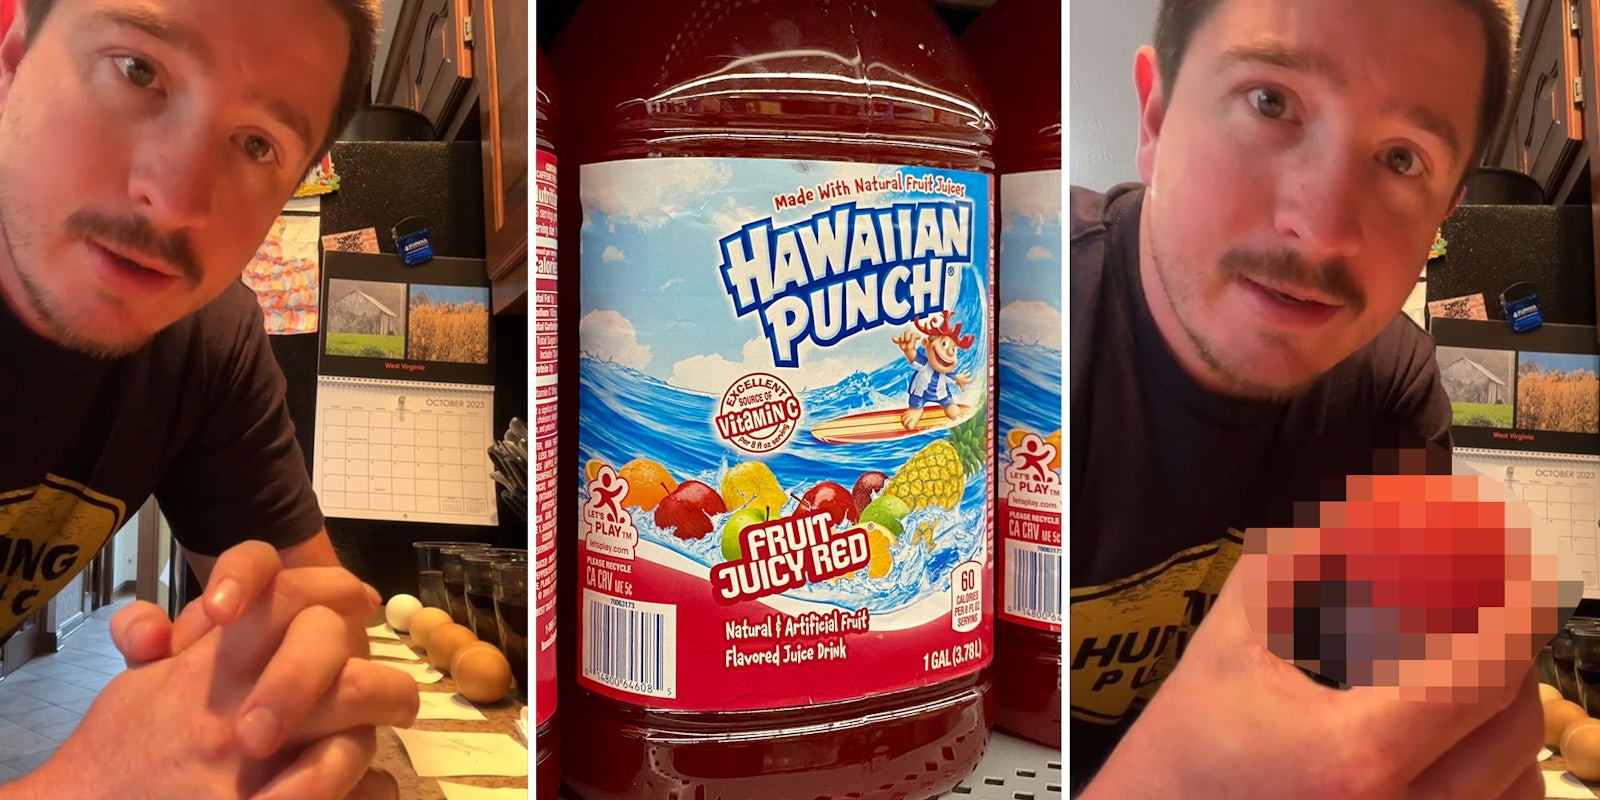 Kid’s science experiment shows what can happen with Hawaiian punch